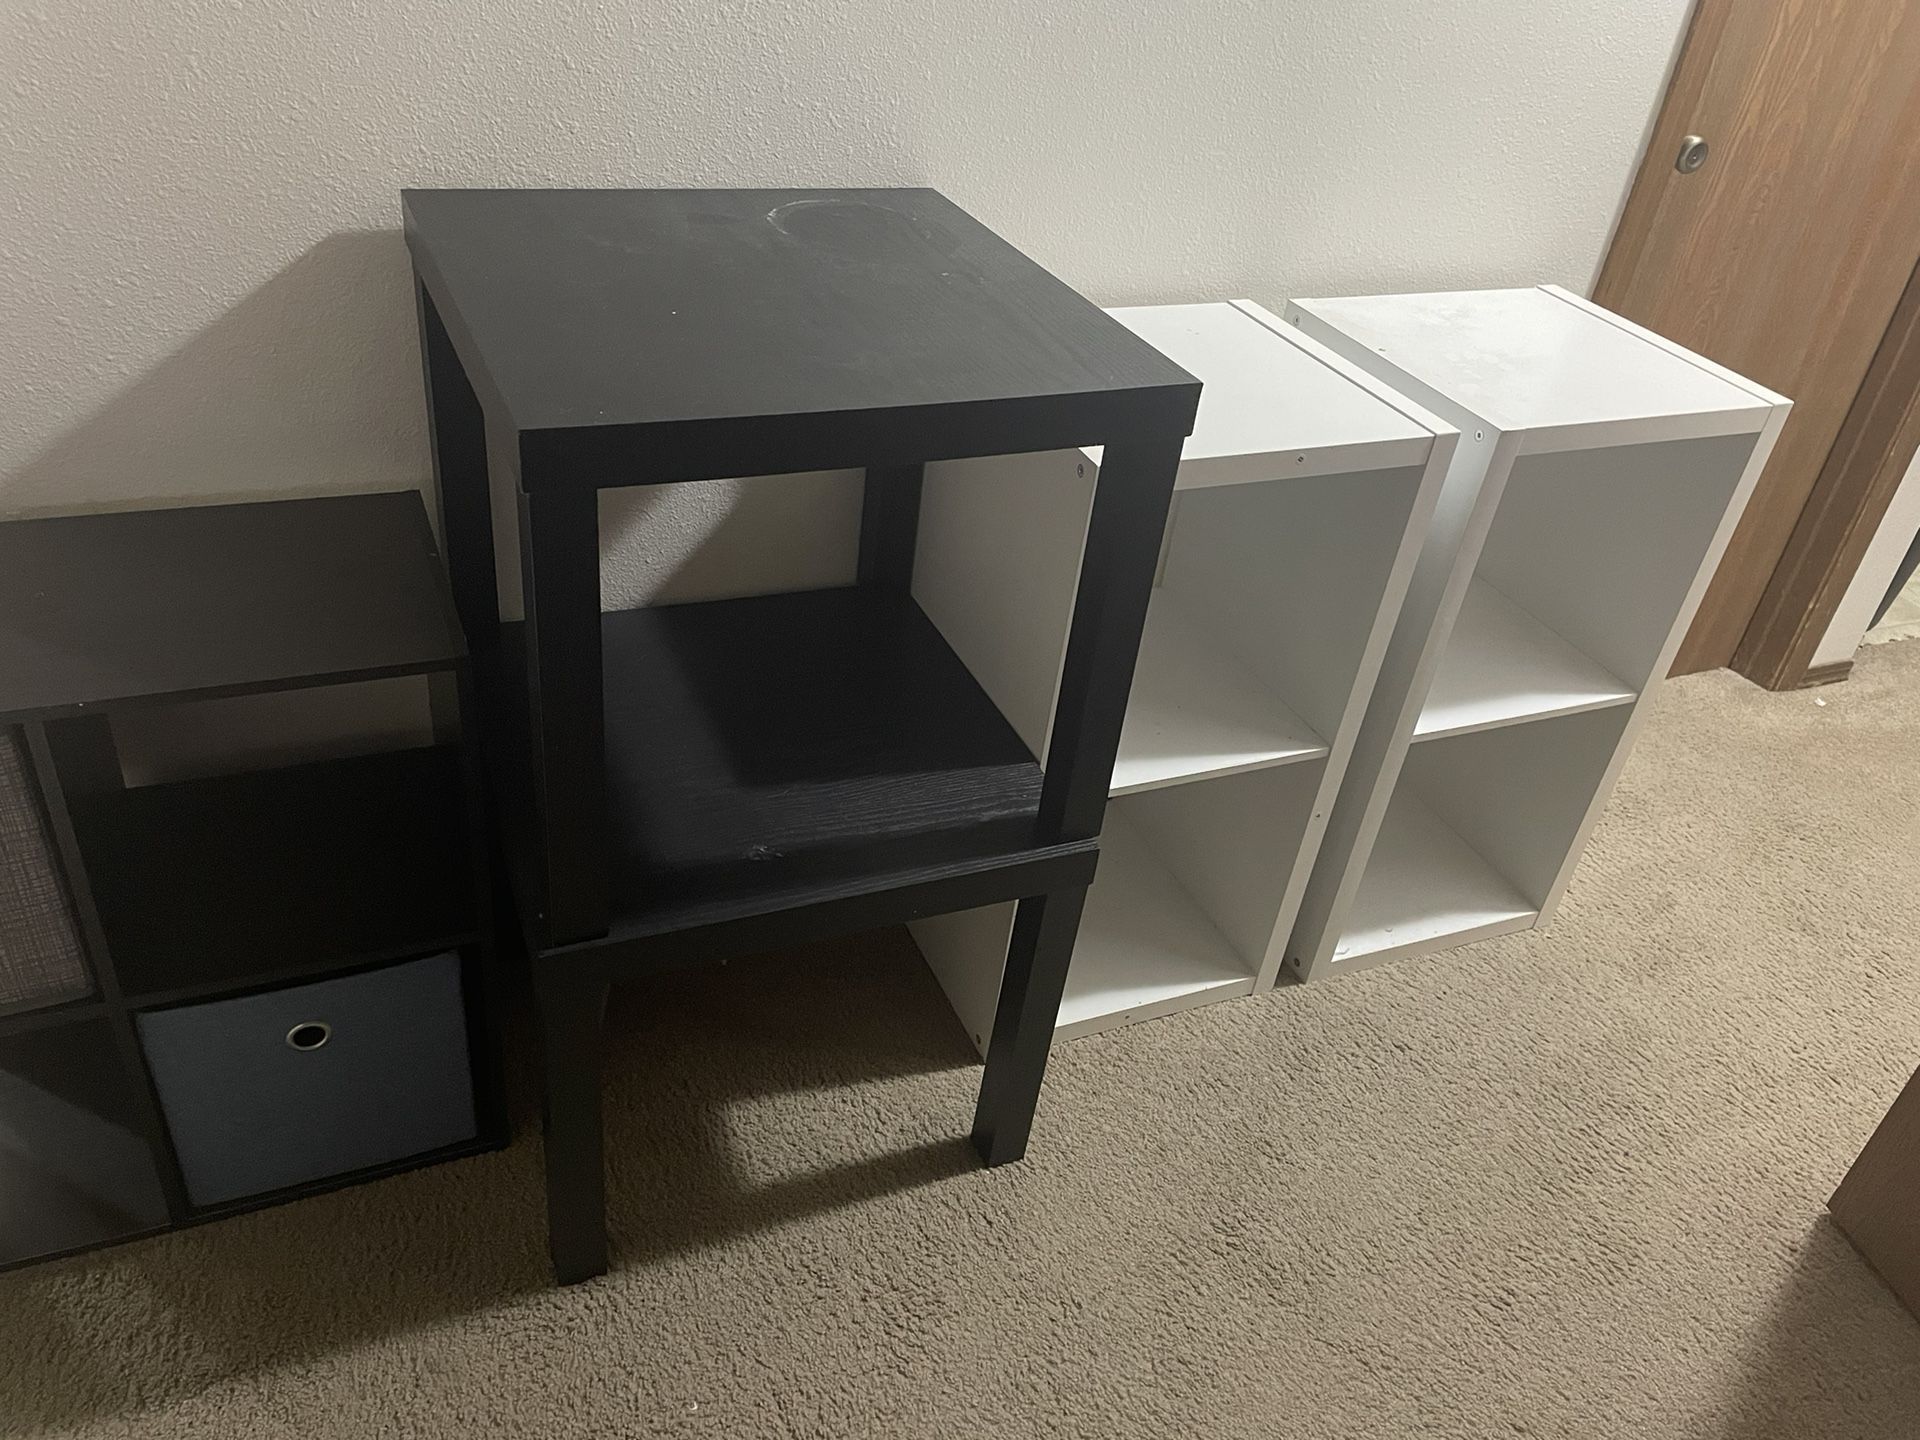 Book Shelf And Night Stands/organizers